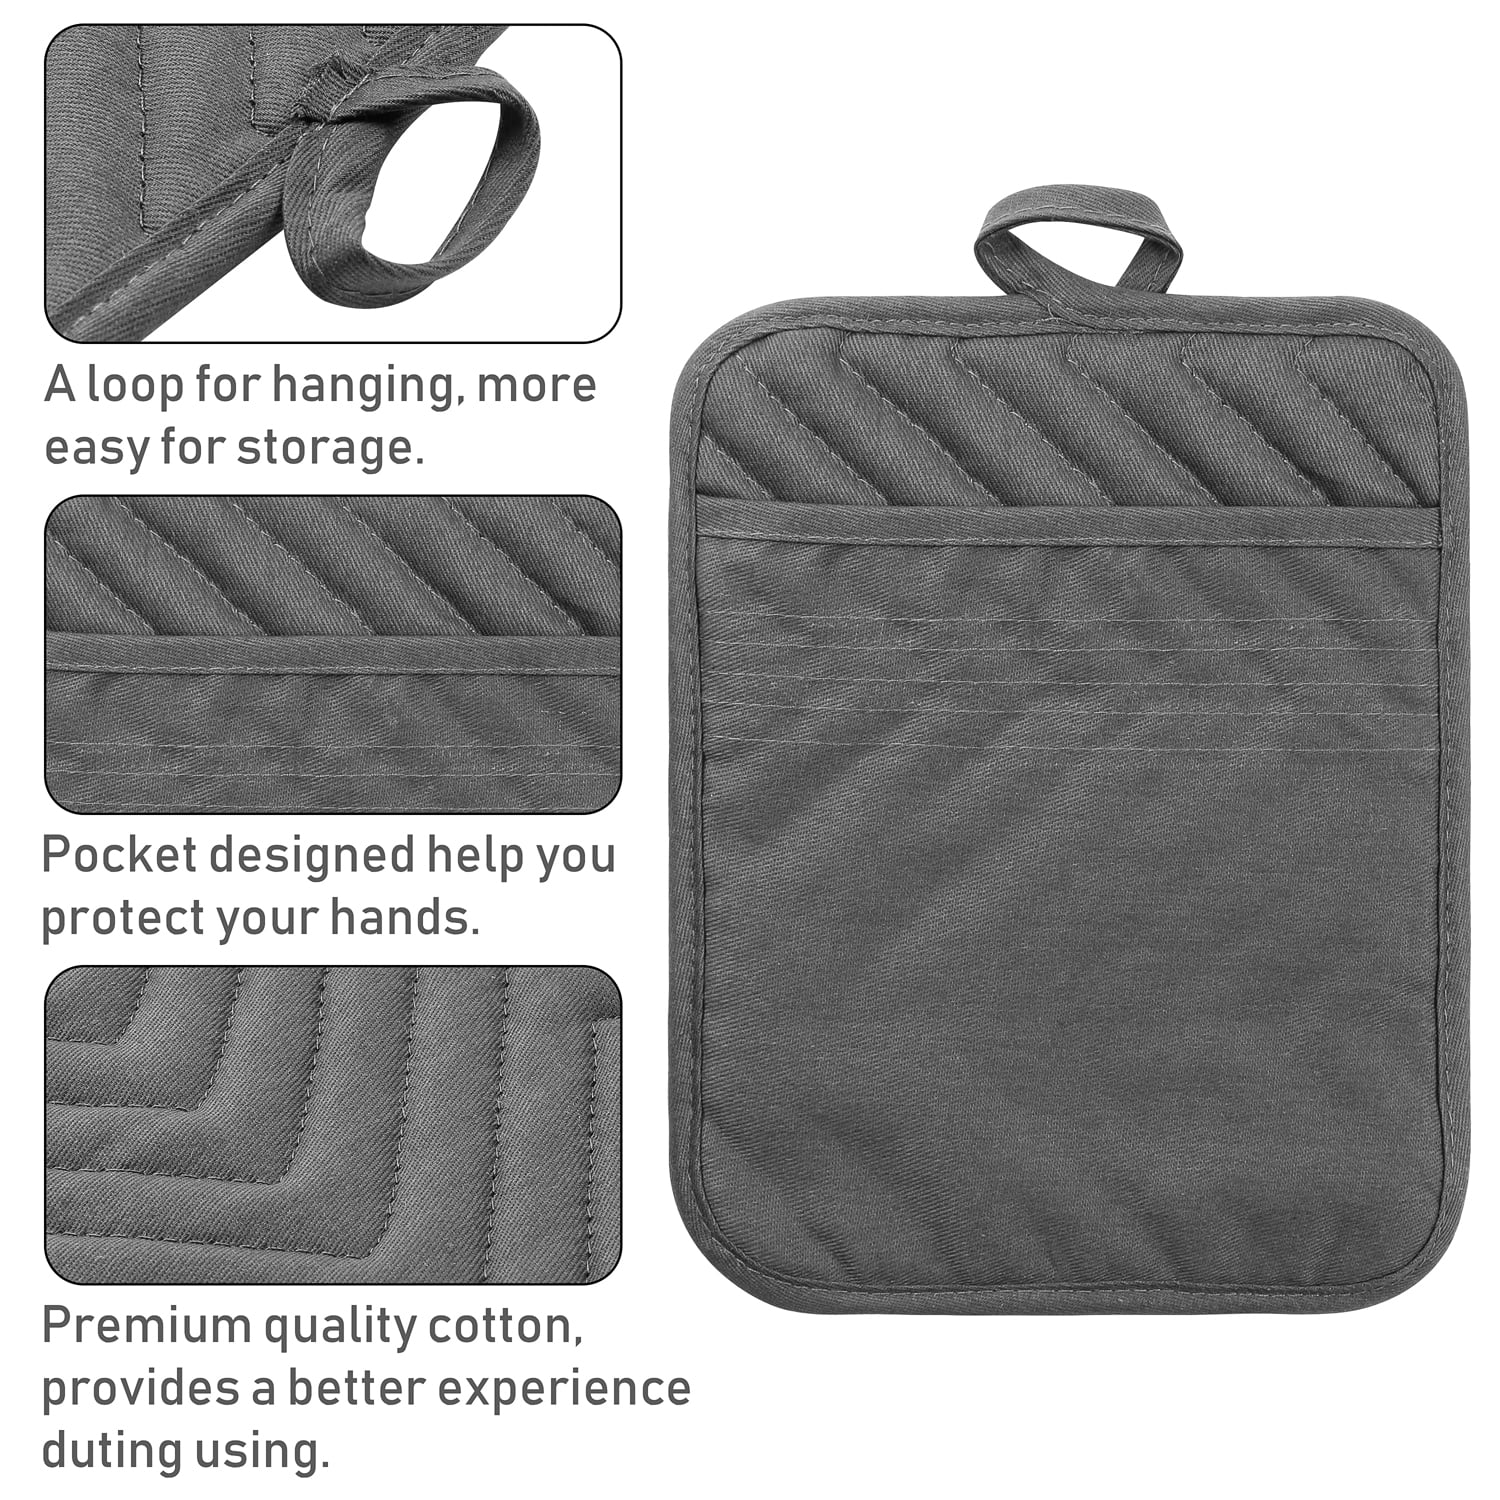 GROBRO7 6Pcs Cotton Oven Mitts Pot Holders Funny Men Choose Your Weapon  Resistant Hot Pads Machine Washable Microwave Gloves Pocket Potholder for